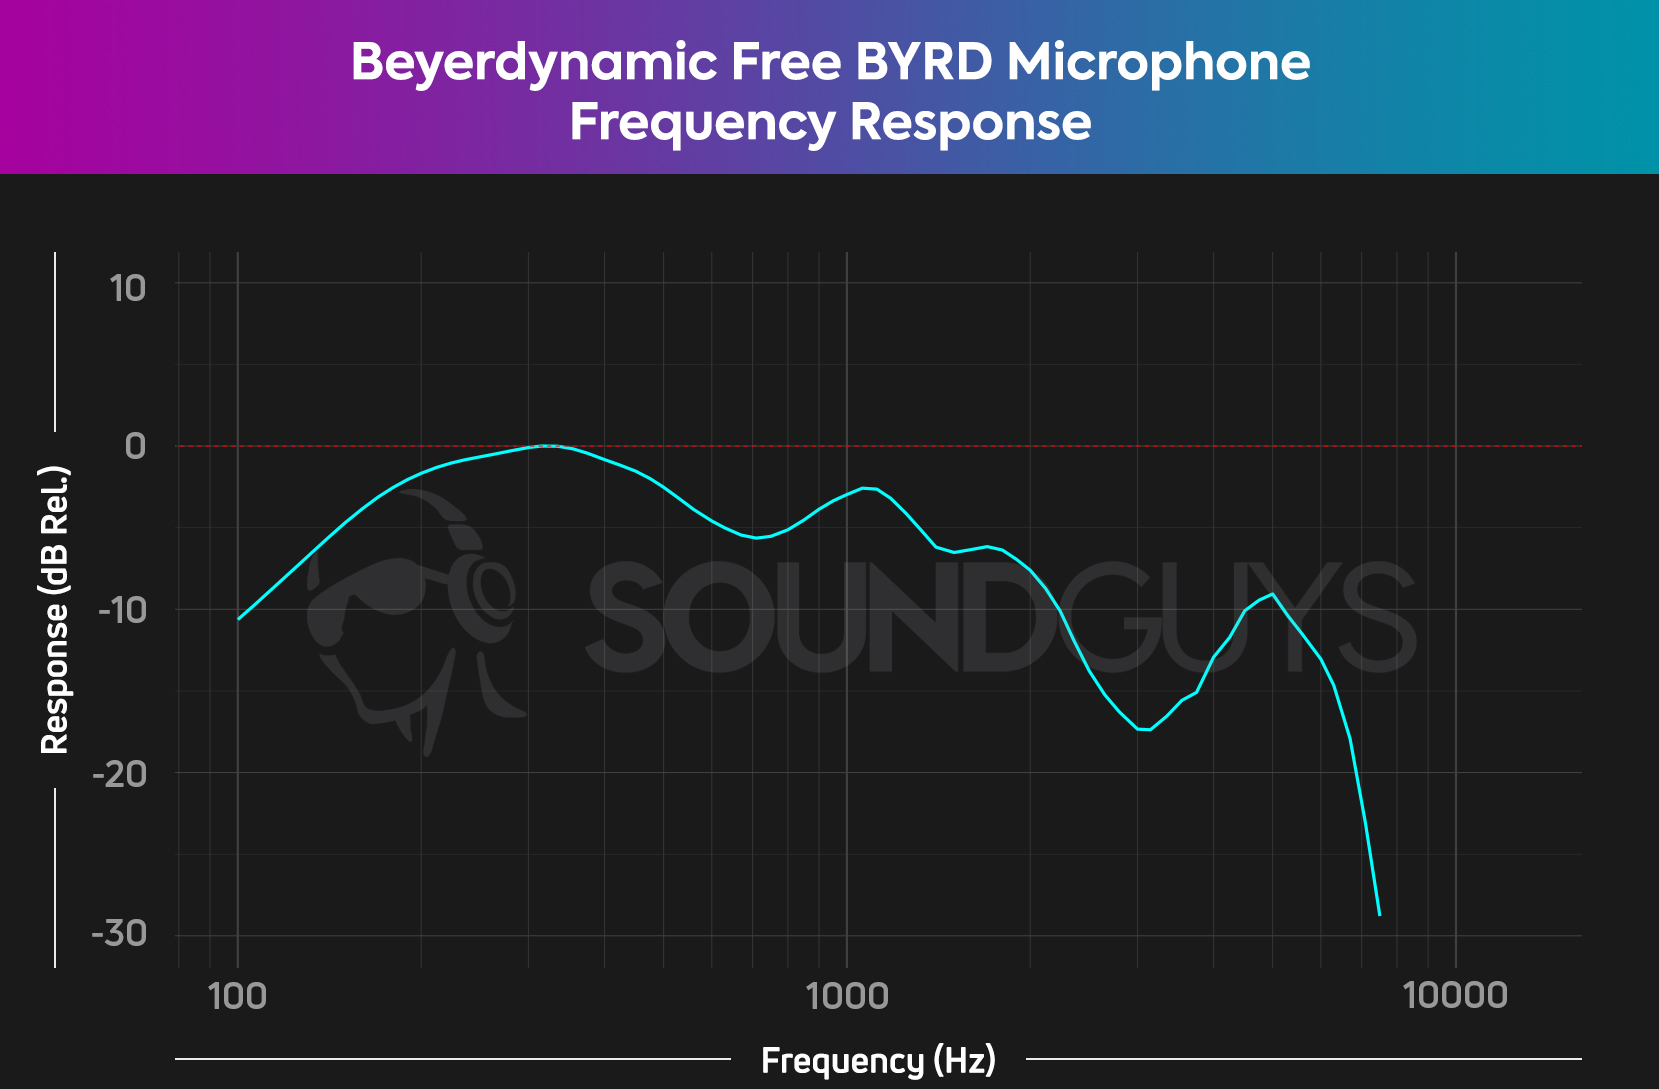 A chart showing the microphone frequency response of the Beyerdynamic Free BYRD